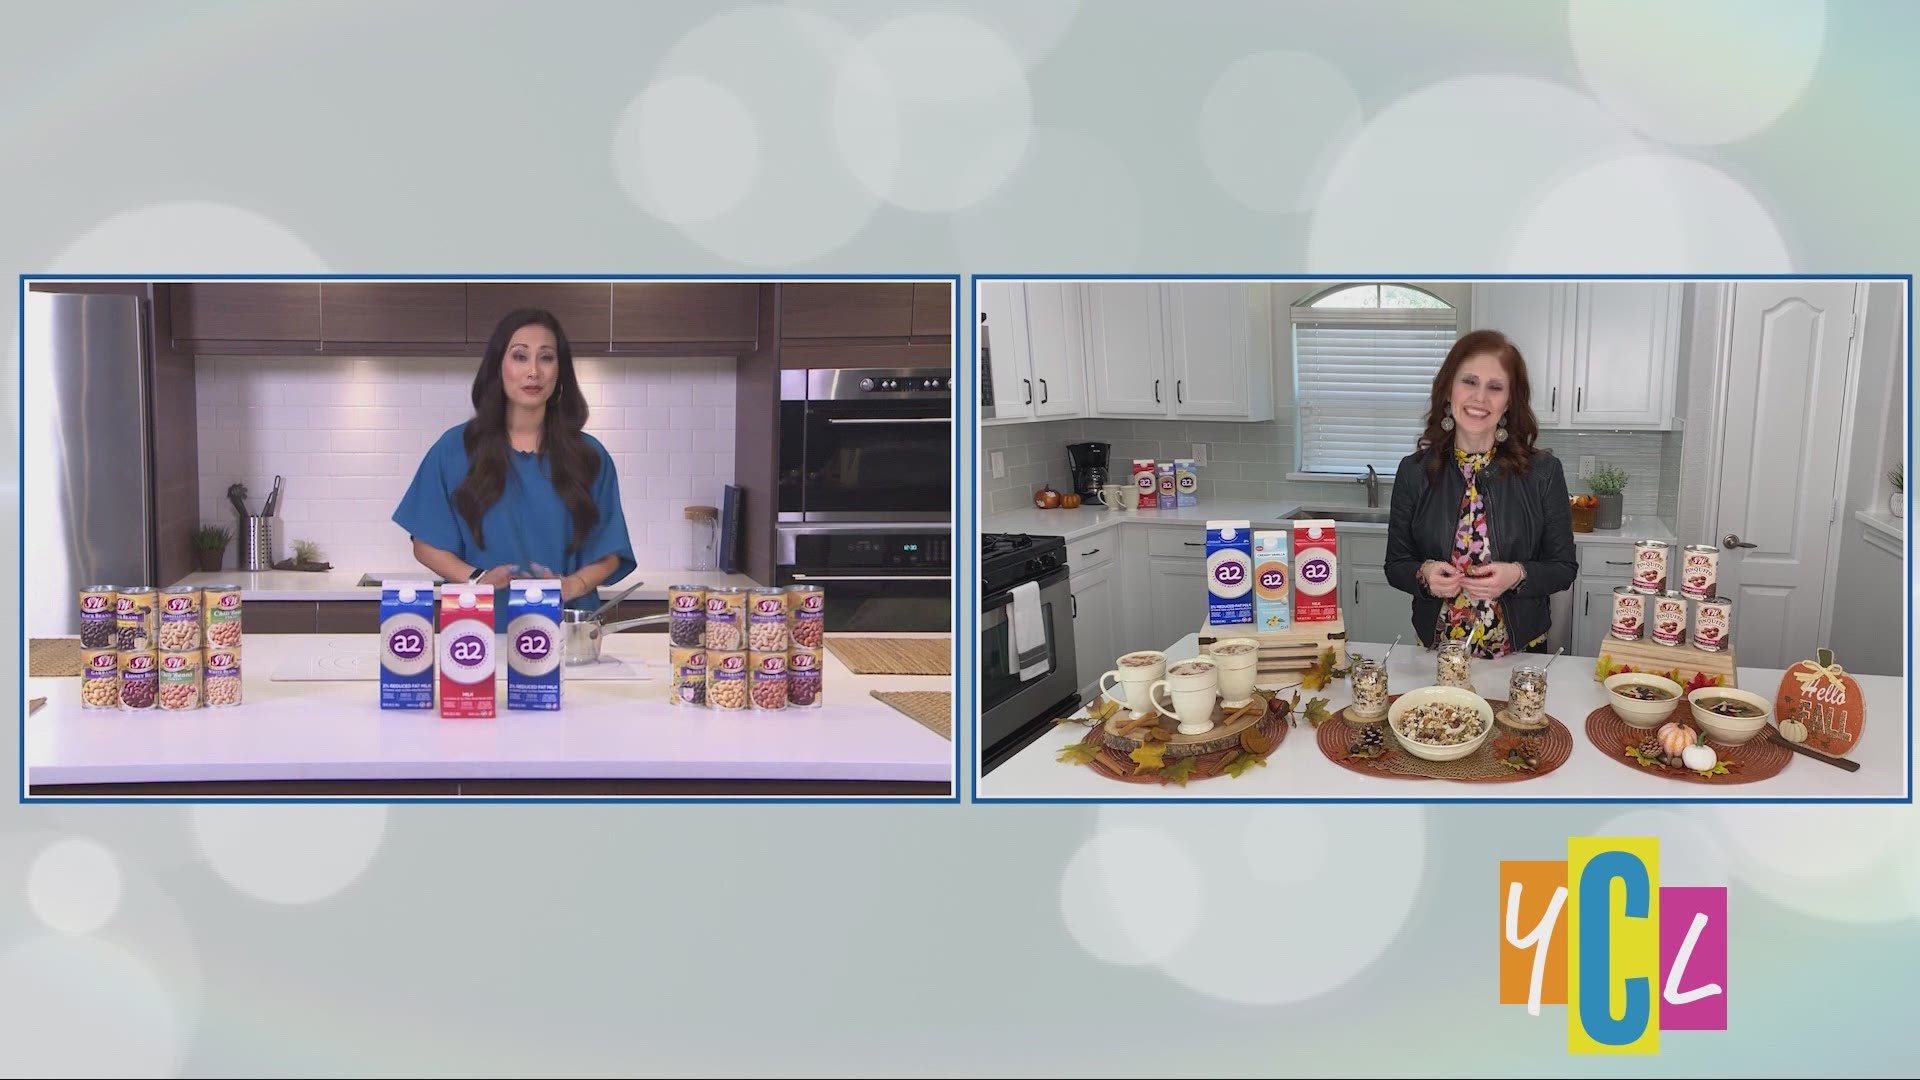 Amy Goodson from RDTV tells us how to incorporate fall flavors and serve up some tasty eats that are easy and delicious. This segment was paid for by Parker’s Plate.